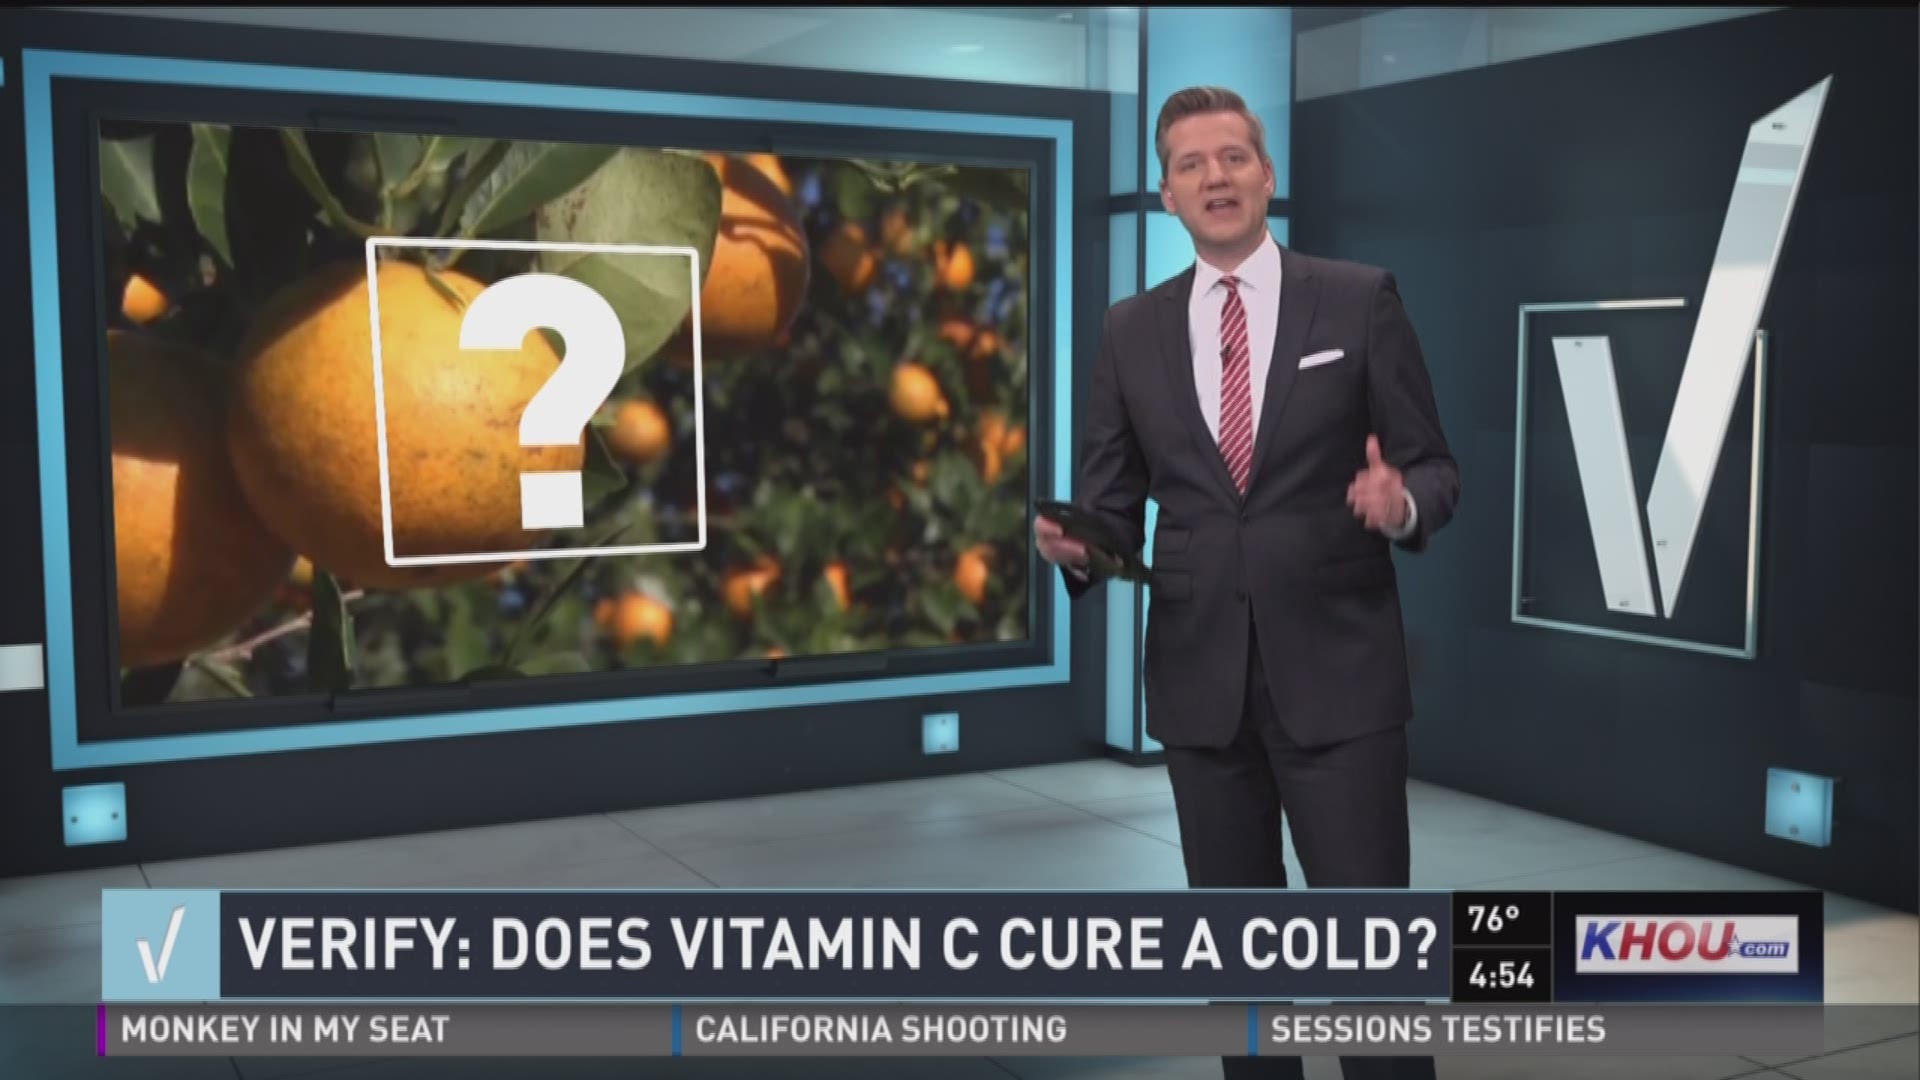 It's cold season in more ways than one. Mother Nature is catching a cold, and you might be catching one, too. So will Vitamin C help you tackle the illness?